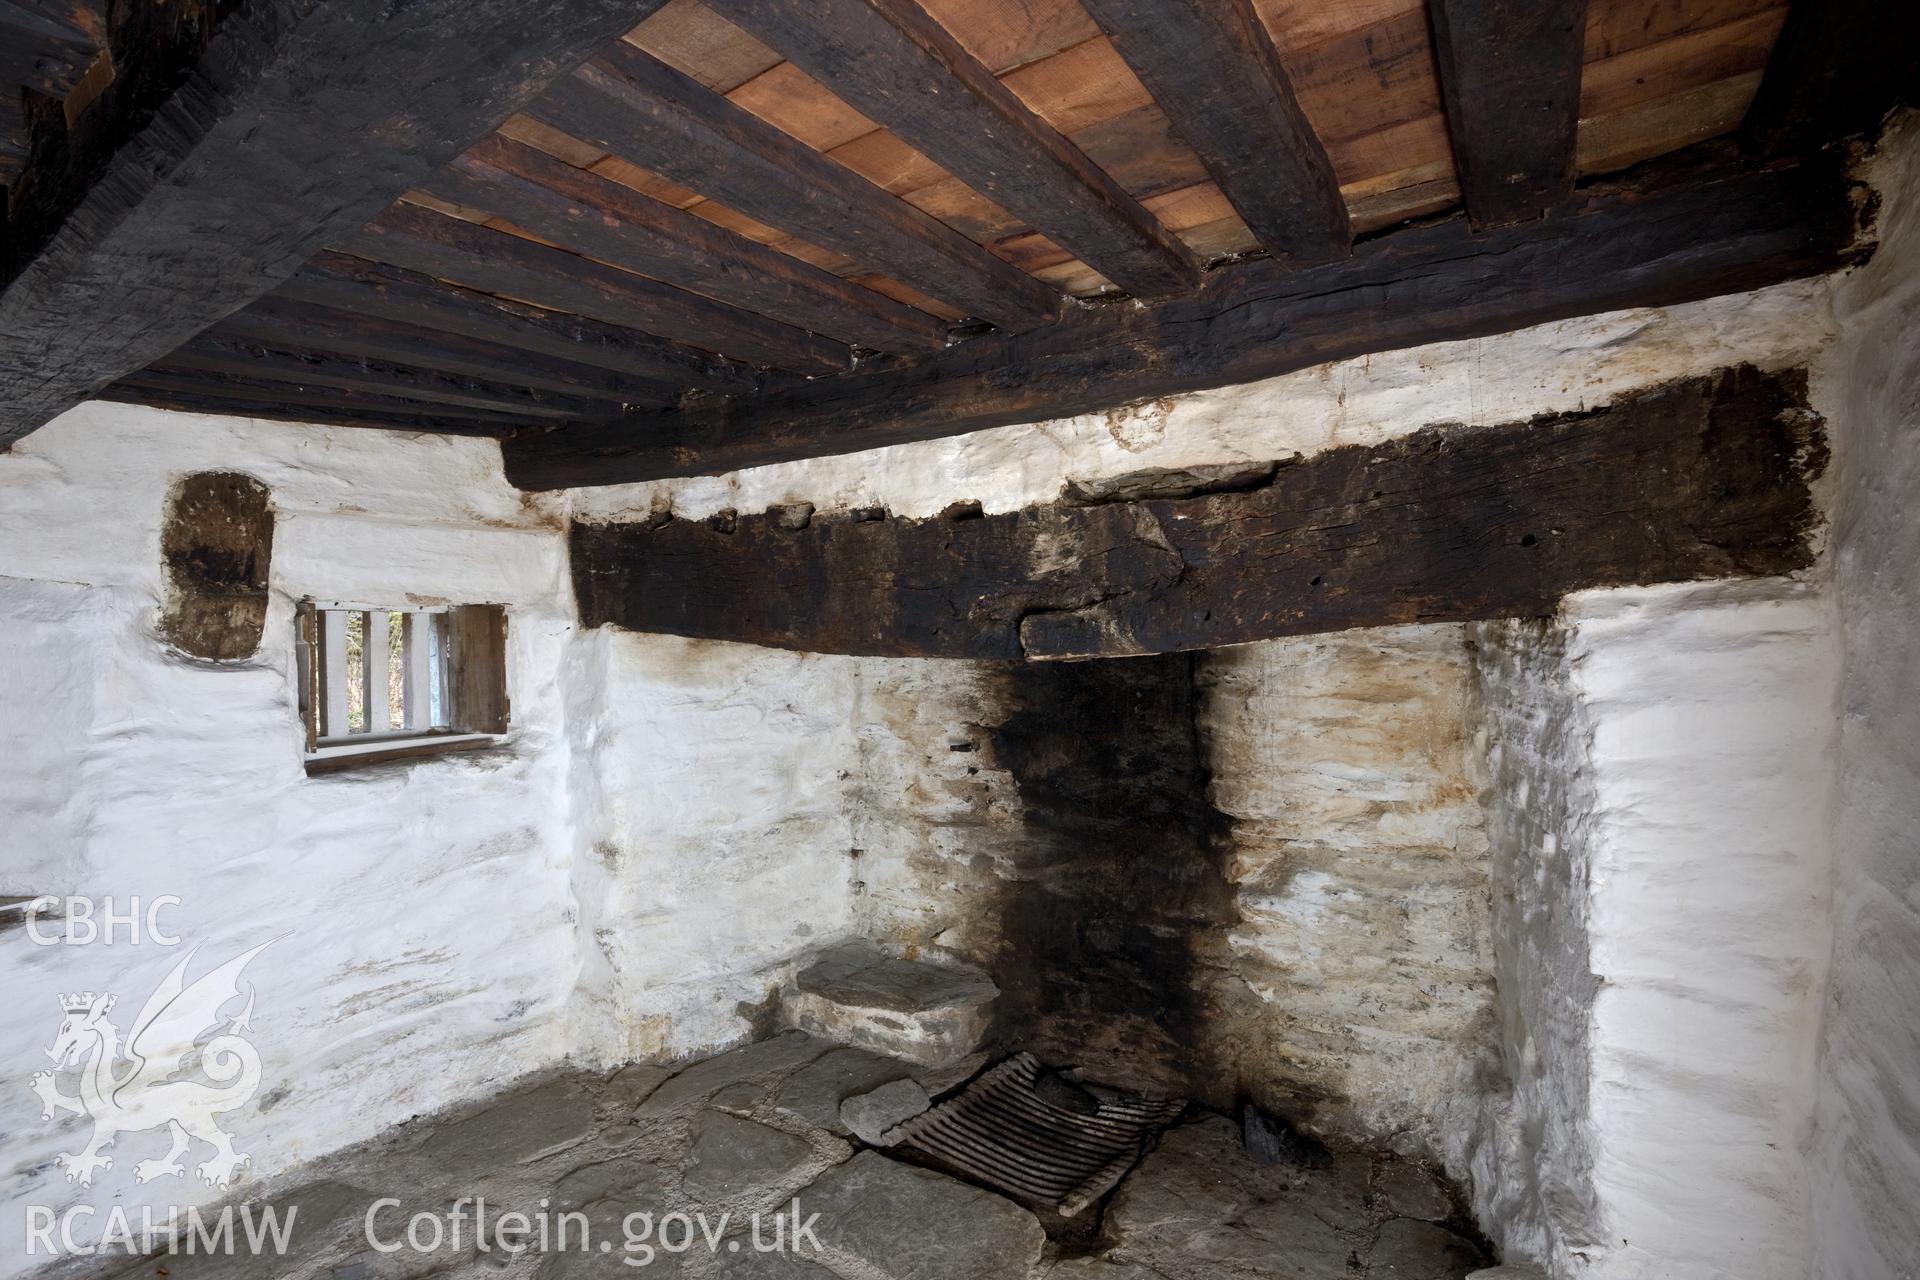 Interior, fireplace and remains of cruck in wall.